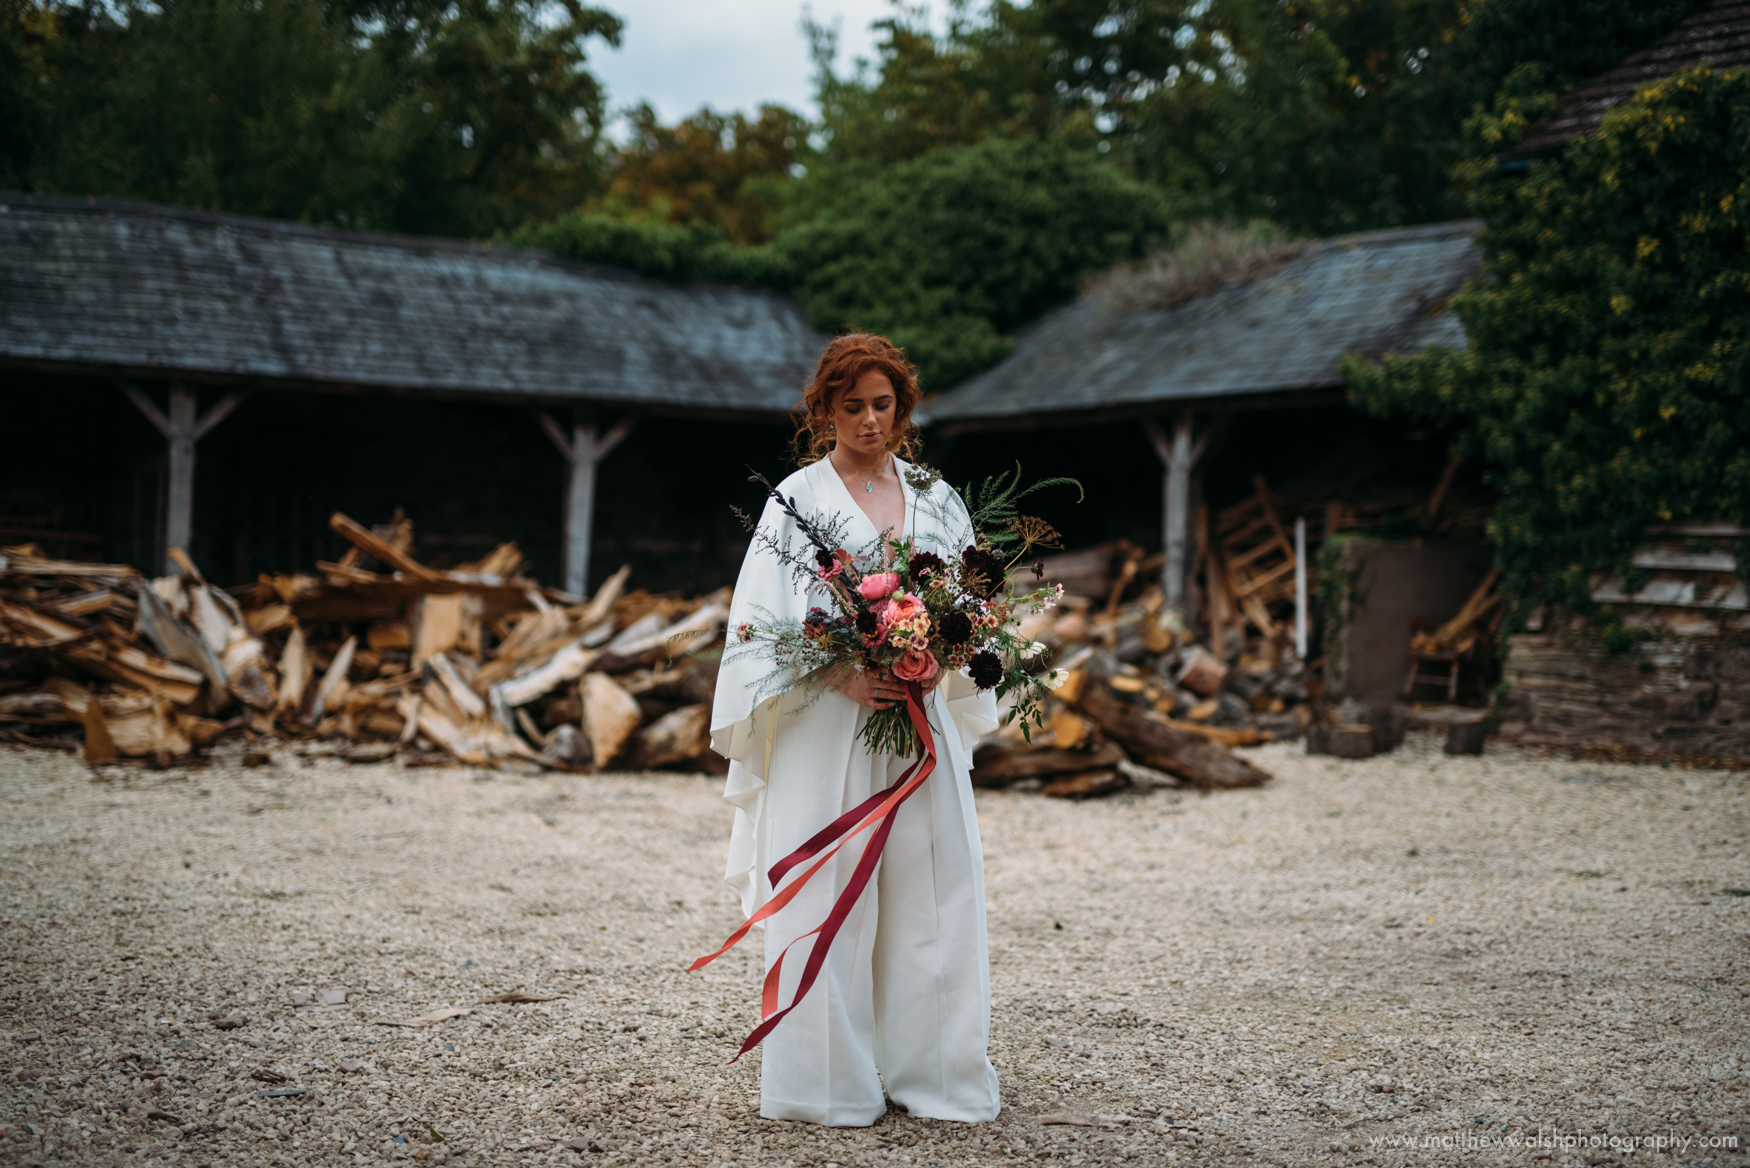 Using depth of field to separate the bride from the backdrop